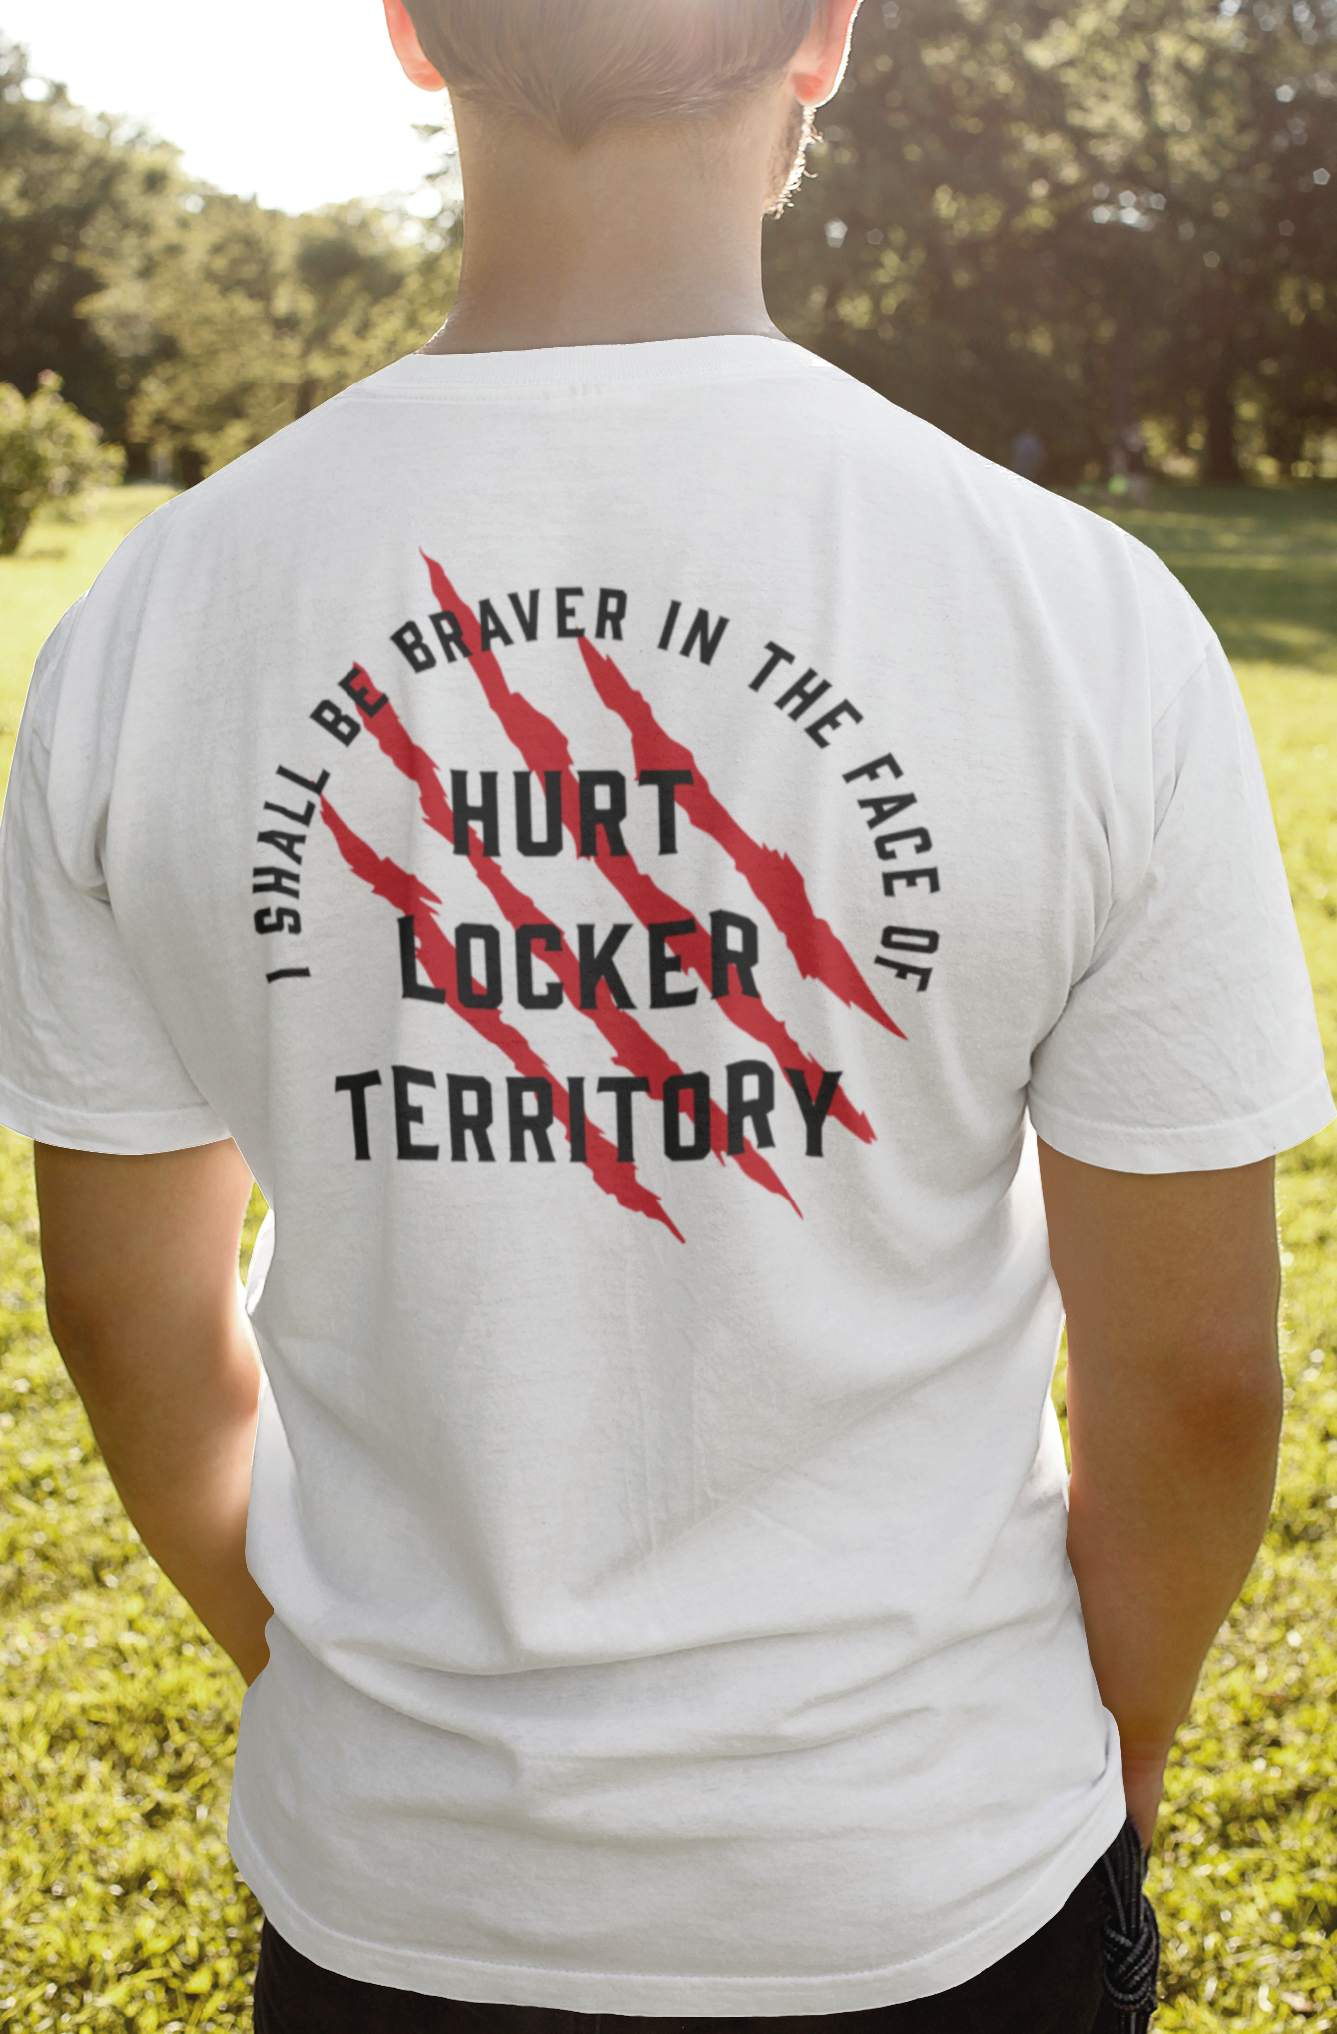 Back of a unisex white t-shirt with a typographic print in red and white